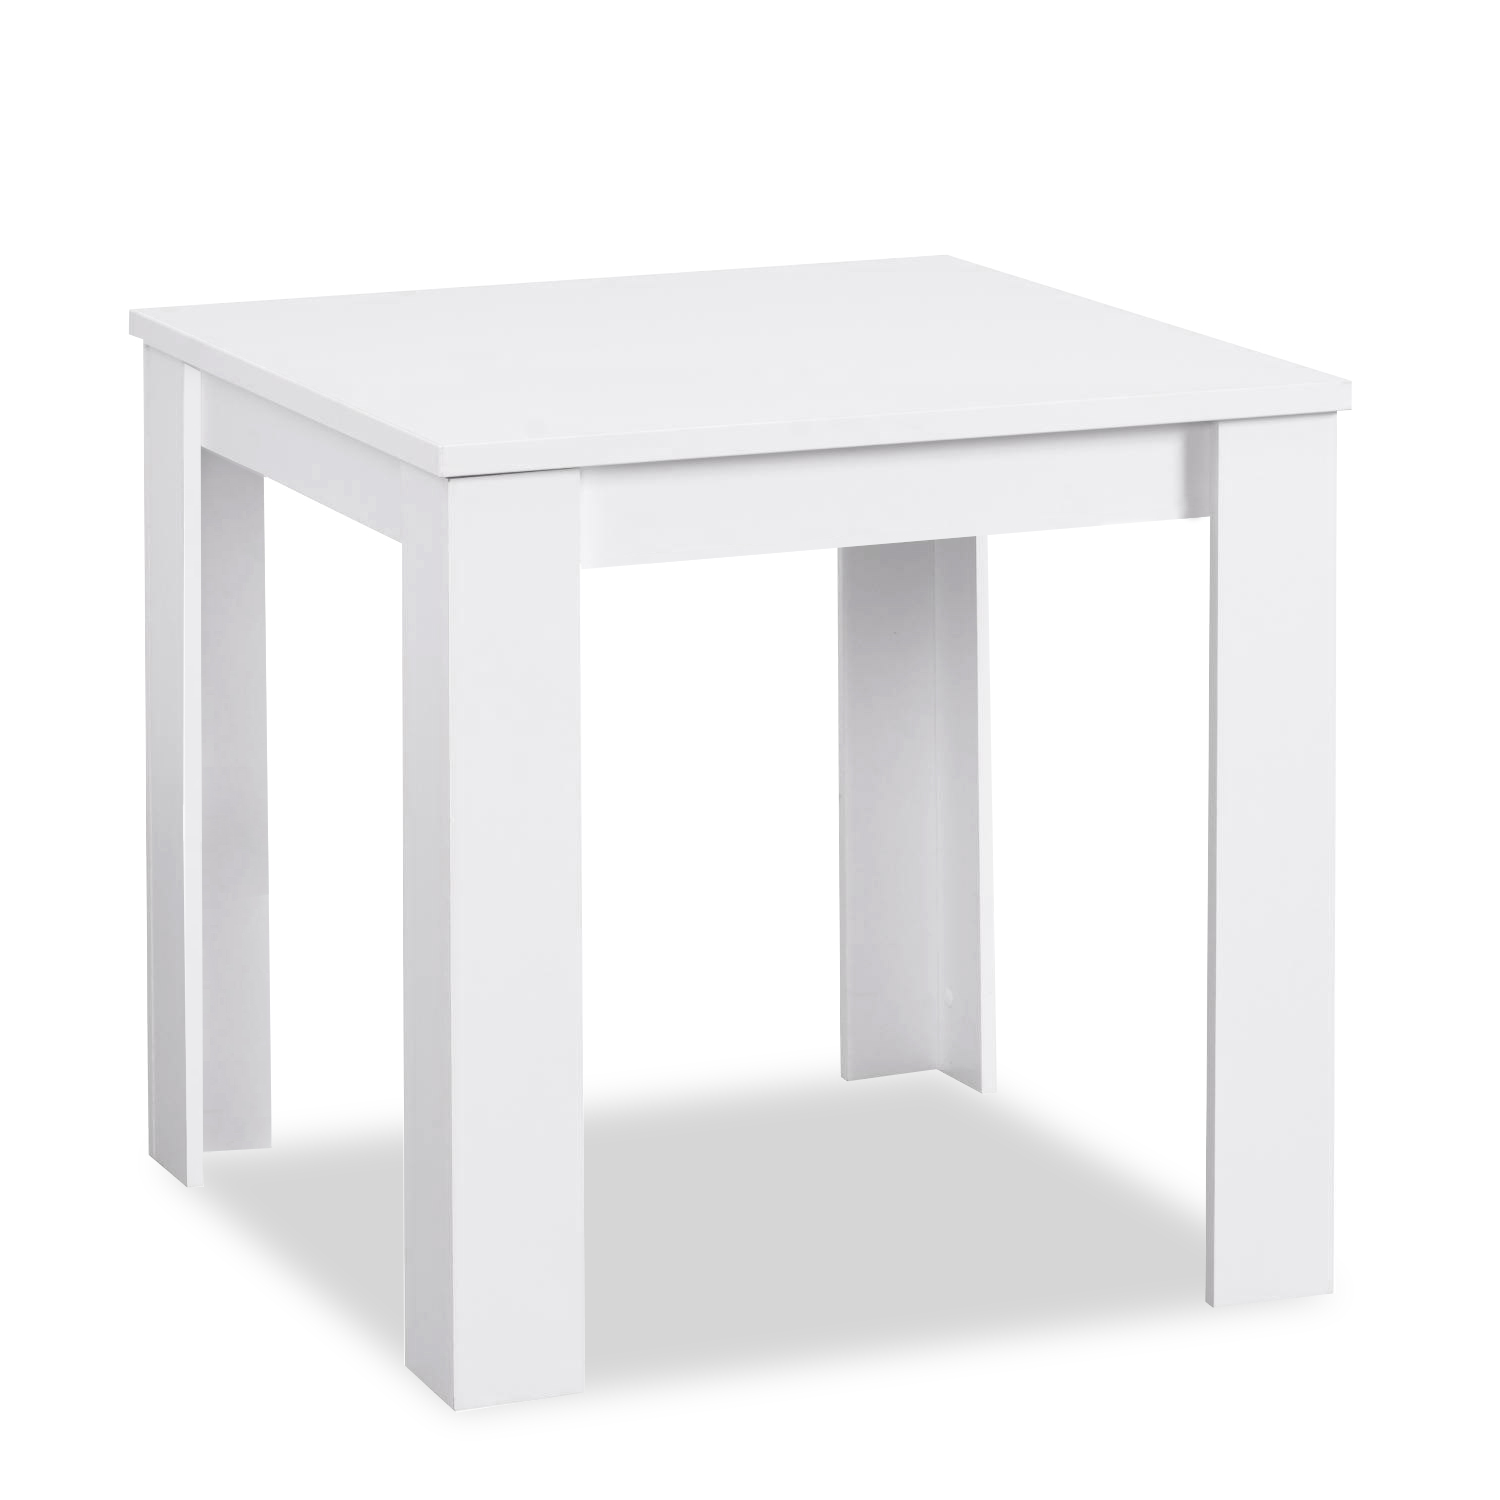 Modern Dining Table White 80x80 cm with 2 Chairs Grey Velvet Dining Room Table Wooden Table